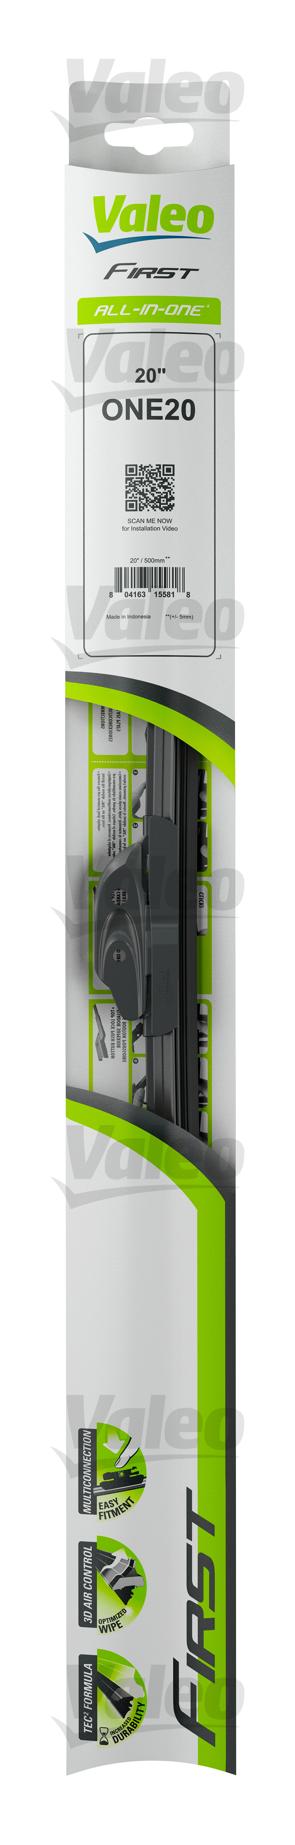 Wiper Blade Single First All-in-one - Valeo Universal